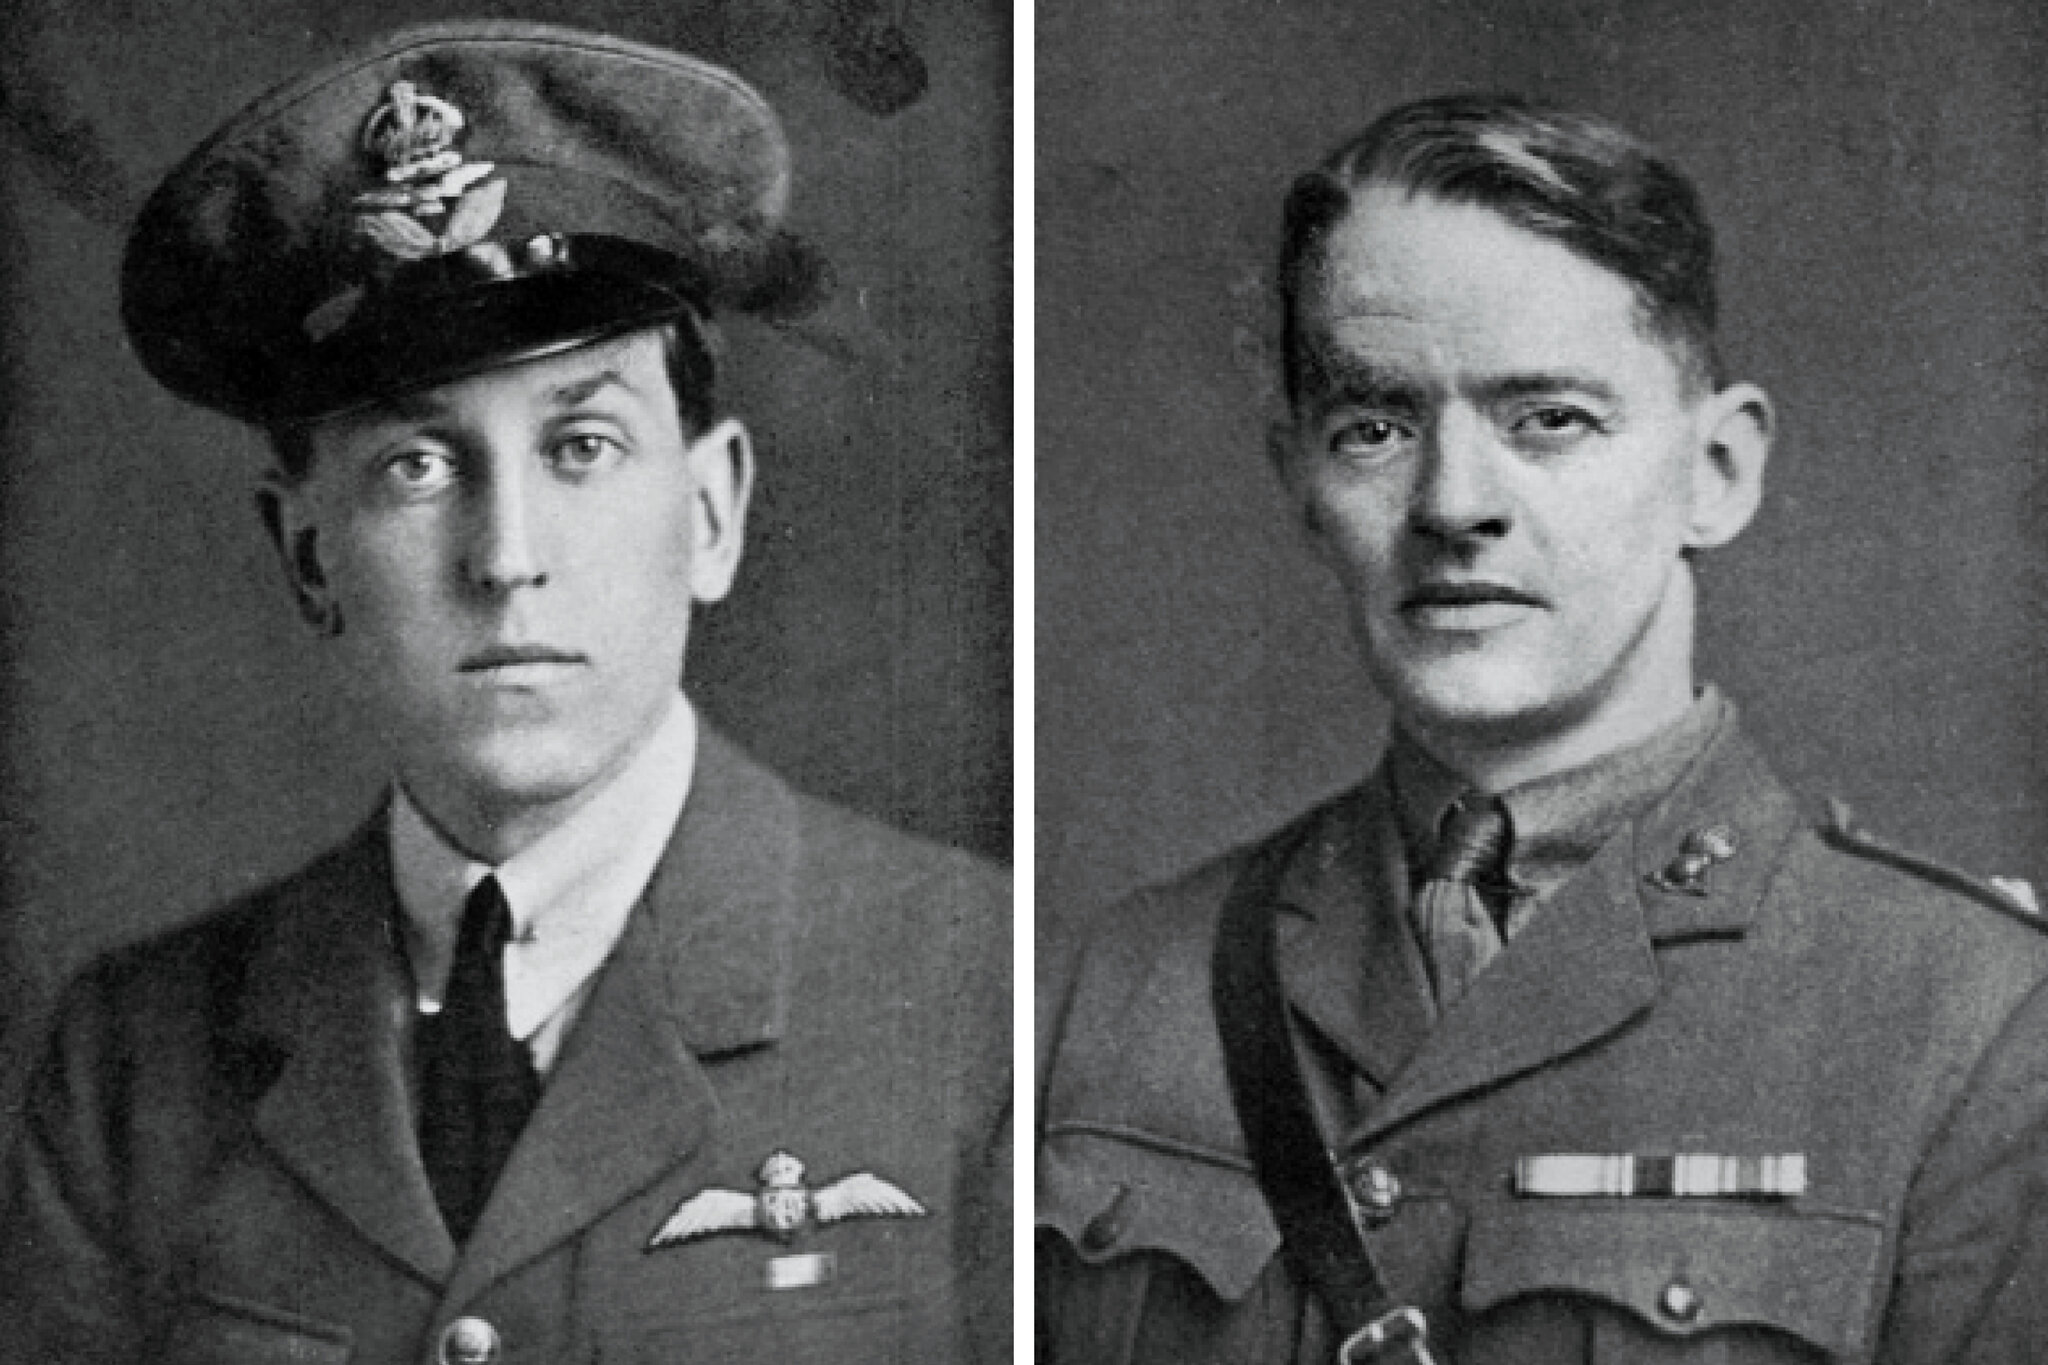 Confidence Men-How Two Prisoners of War Engineered the Most Remarkable Escape in History